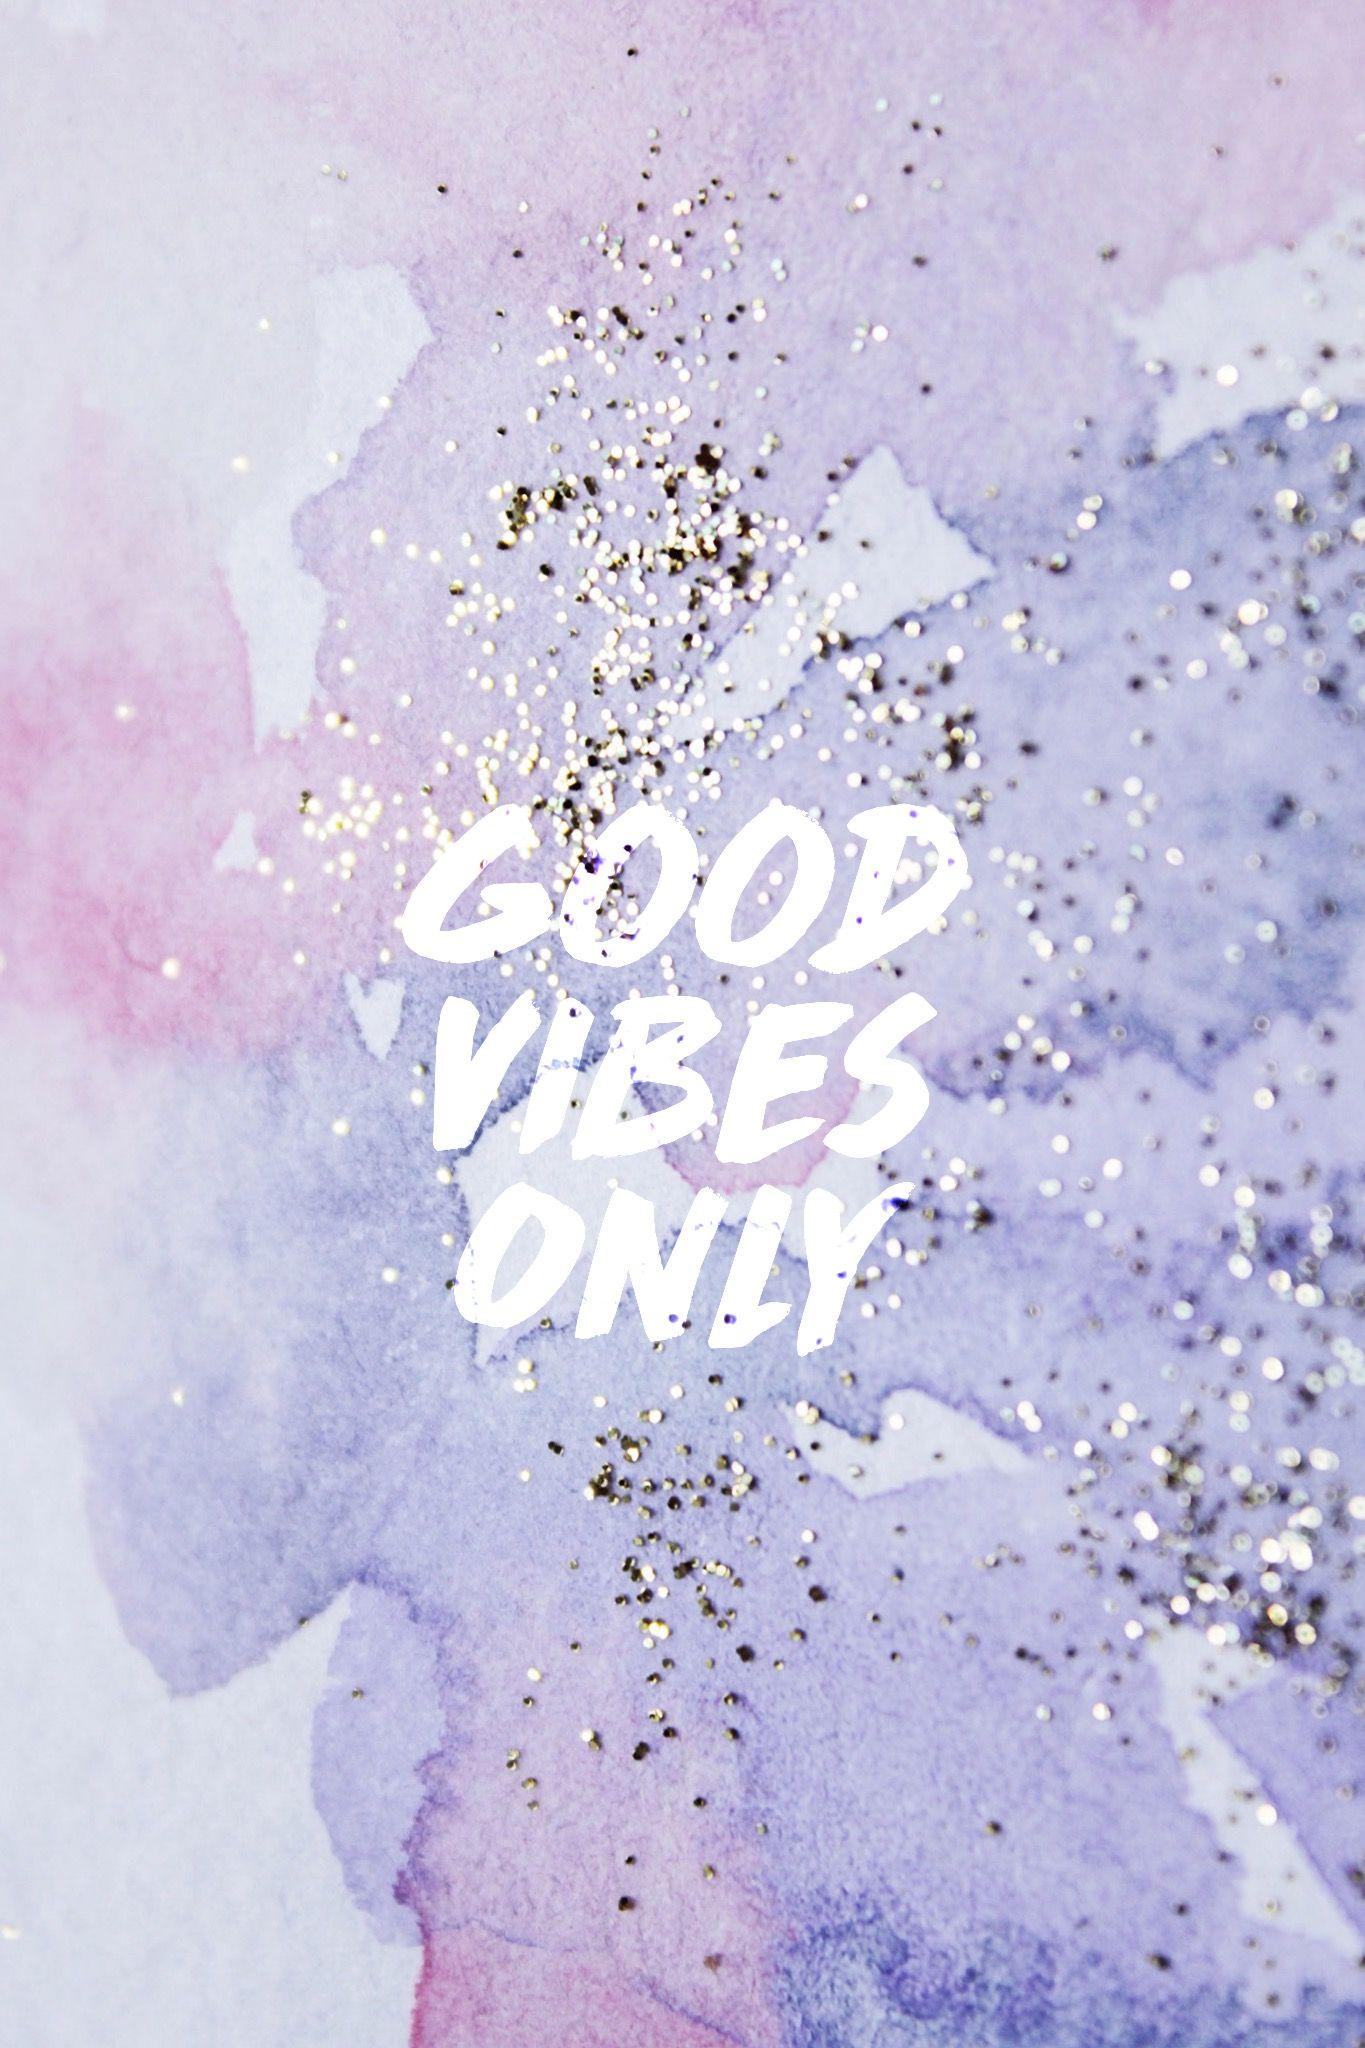 Good Vibes. #madewithover Download and edit your own iPhone